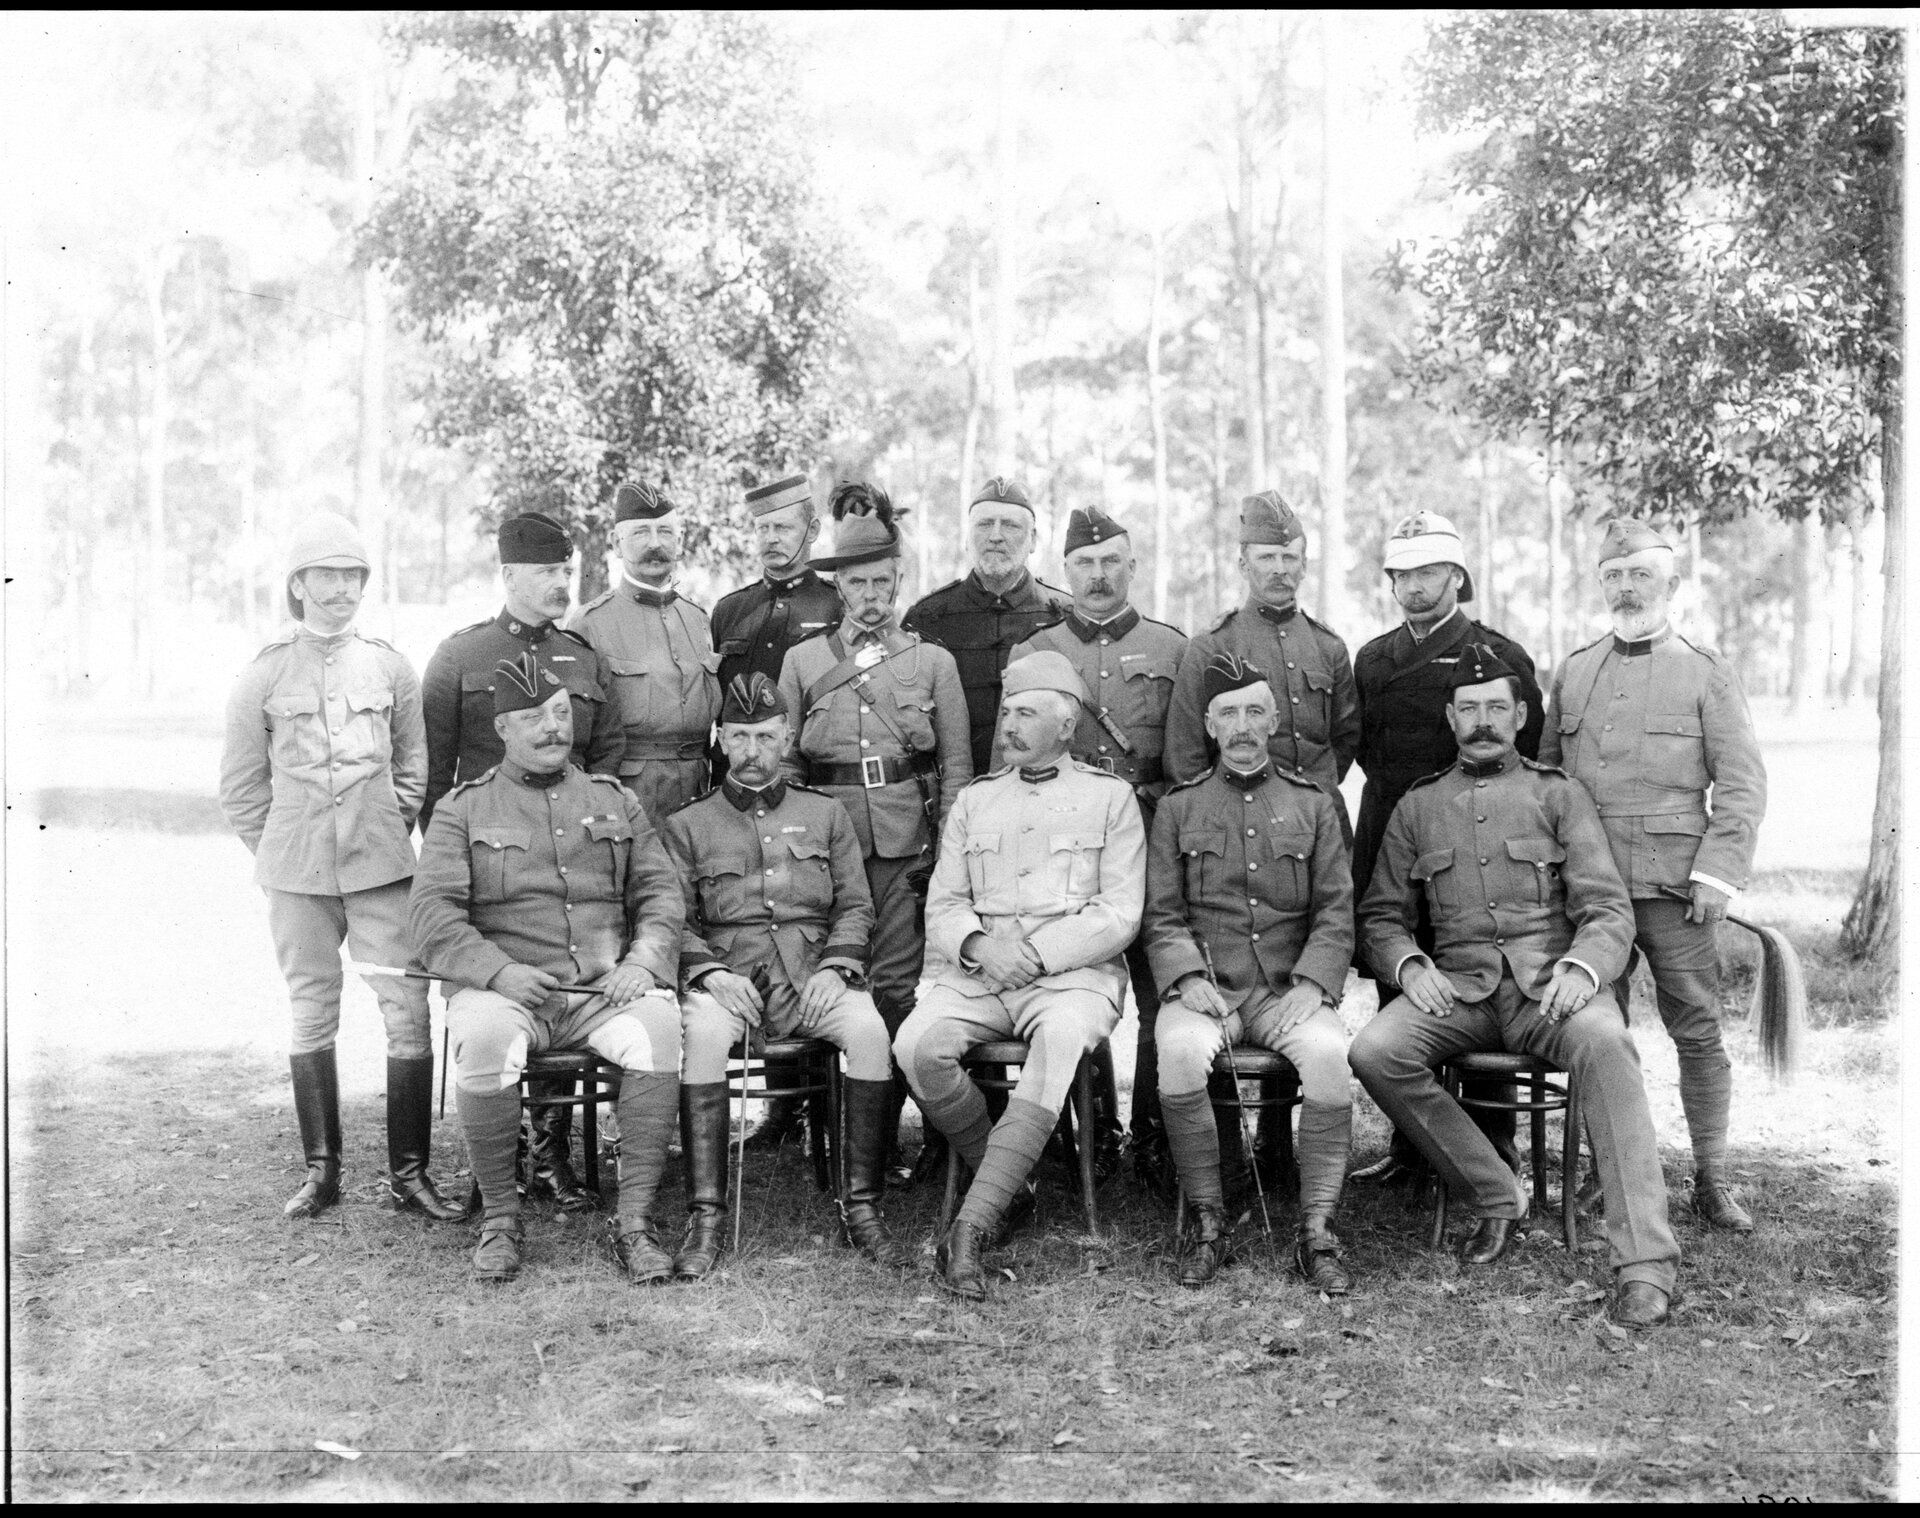 Group photo of military men in various military uniforms